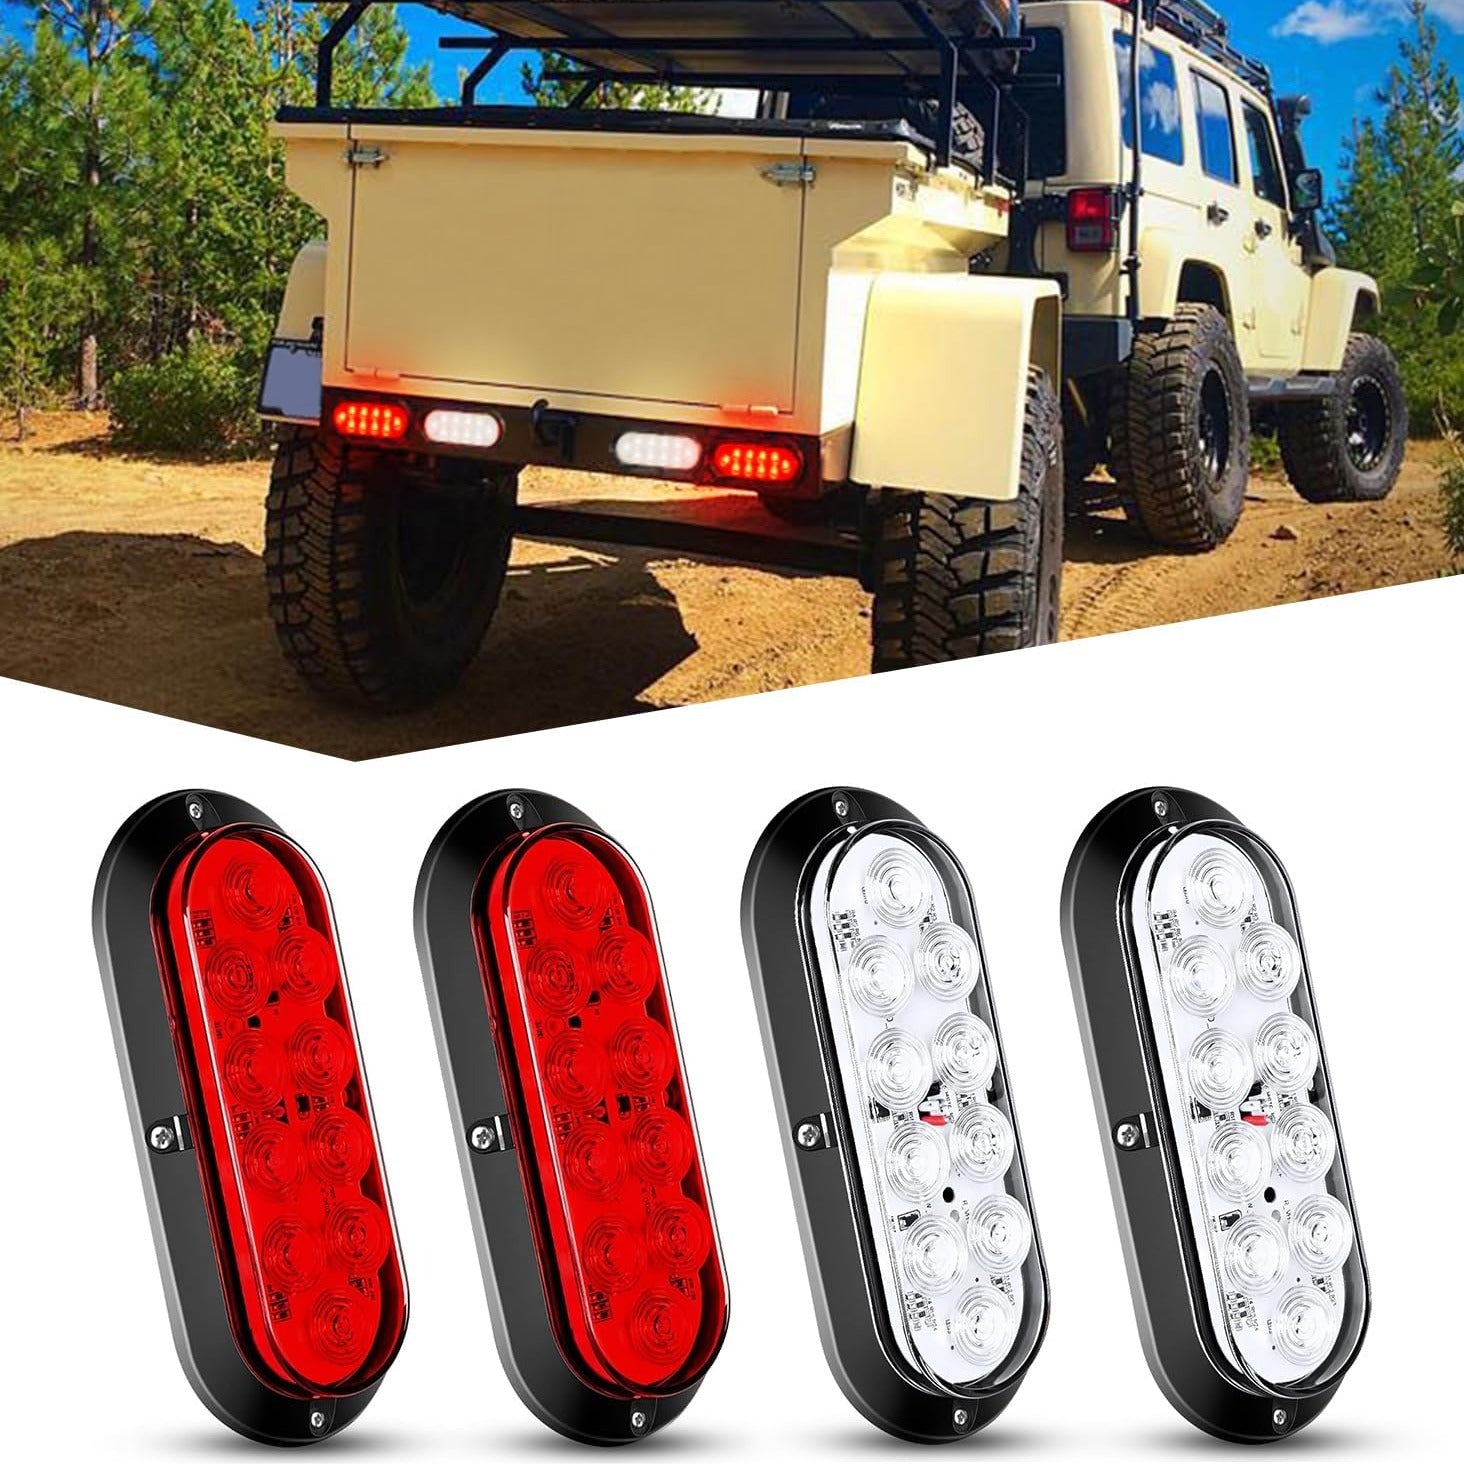 6" Oval Red White Upgrade LED Trailer Tail Lights (4PCS) Nilight